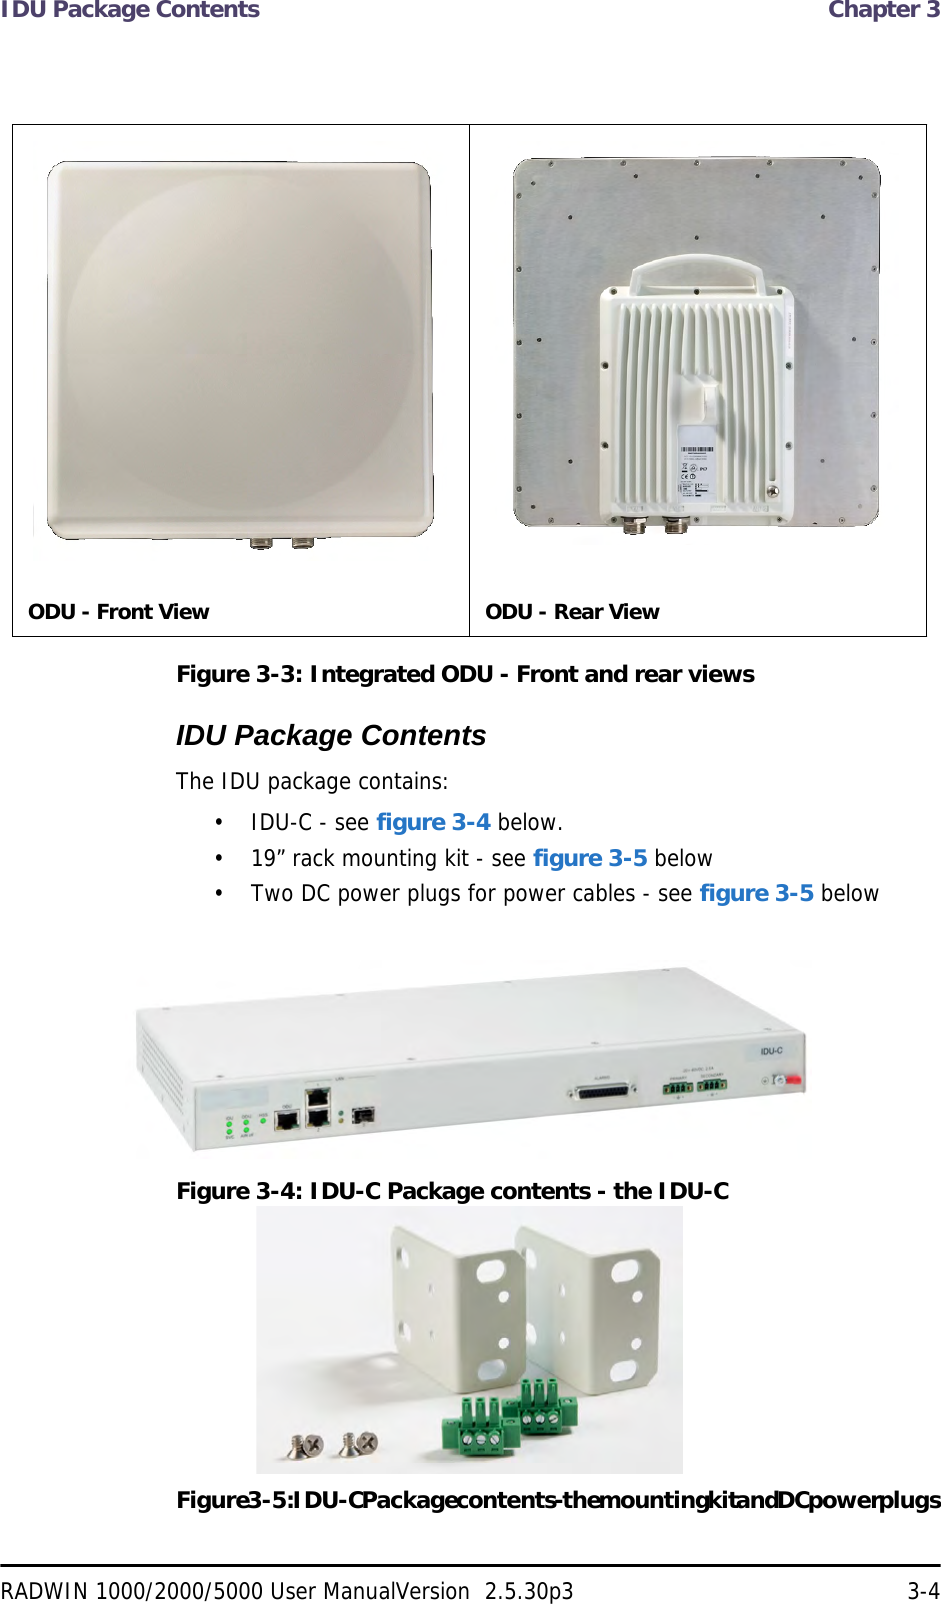 IDU Package Contents  Chapter 3RADWIN 1000/2000/5000 User ManualVersion  2.5.30p3 3-4Figure 3-3: Integrated ODU - Front and rear viewsIDU Package ContentsThe IDU package contains:• IDU-C - see figure 3-4 below.• 19” rack mounting kit - see figure 3-5 below• Two DC power plugs for power cables - see figure 3-5 belowFigure 3-4: IDU-C Package contents - the IDU-CFigure 3-5: IDU-C Package contents - the mounting kit and DC power plugsODU - Front View ODU - Rear View